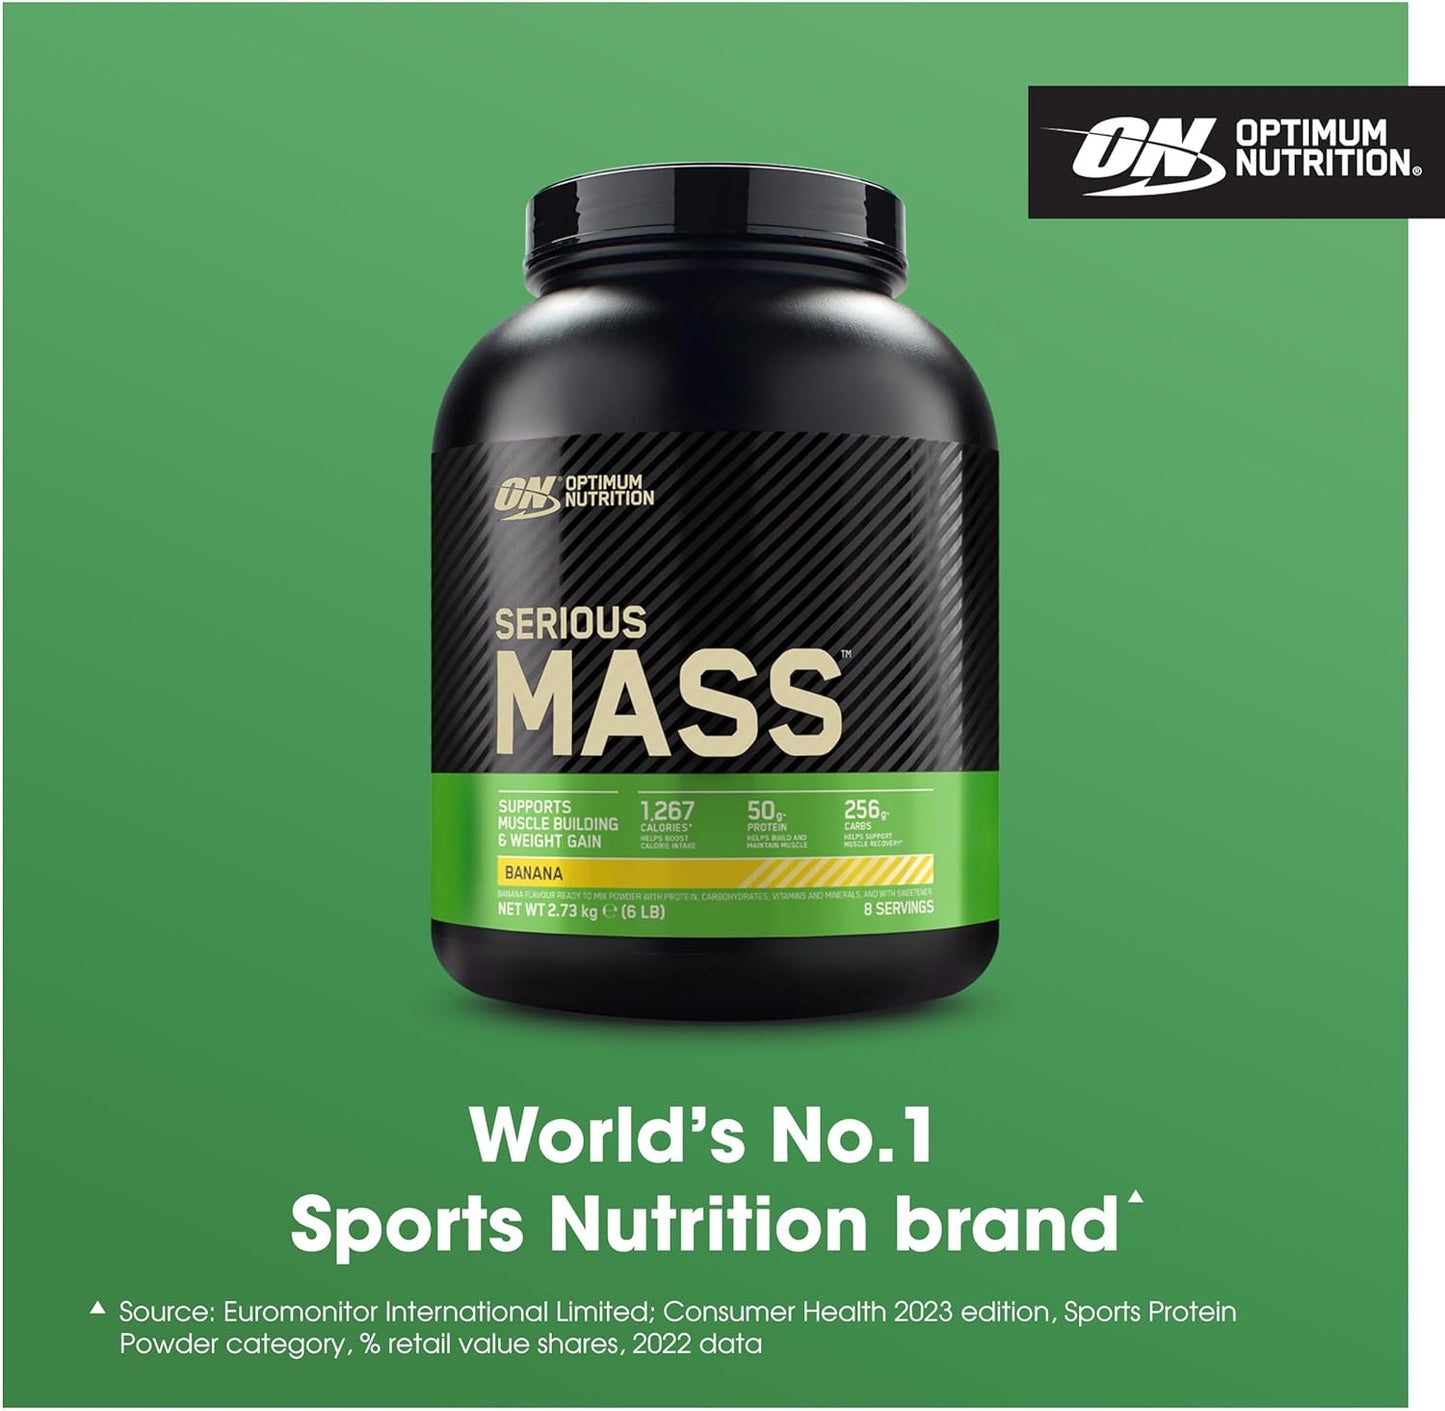 Serious Mass Protein Powder with Creatine, Glutamine, 25 Vitamins & Minerals, High Calorie Mass Gainer, Banana Flavour, 8 Servings, 2.73Kg, Packaging May Vary